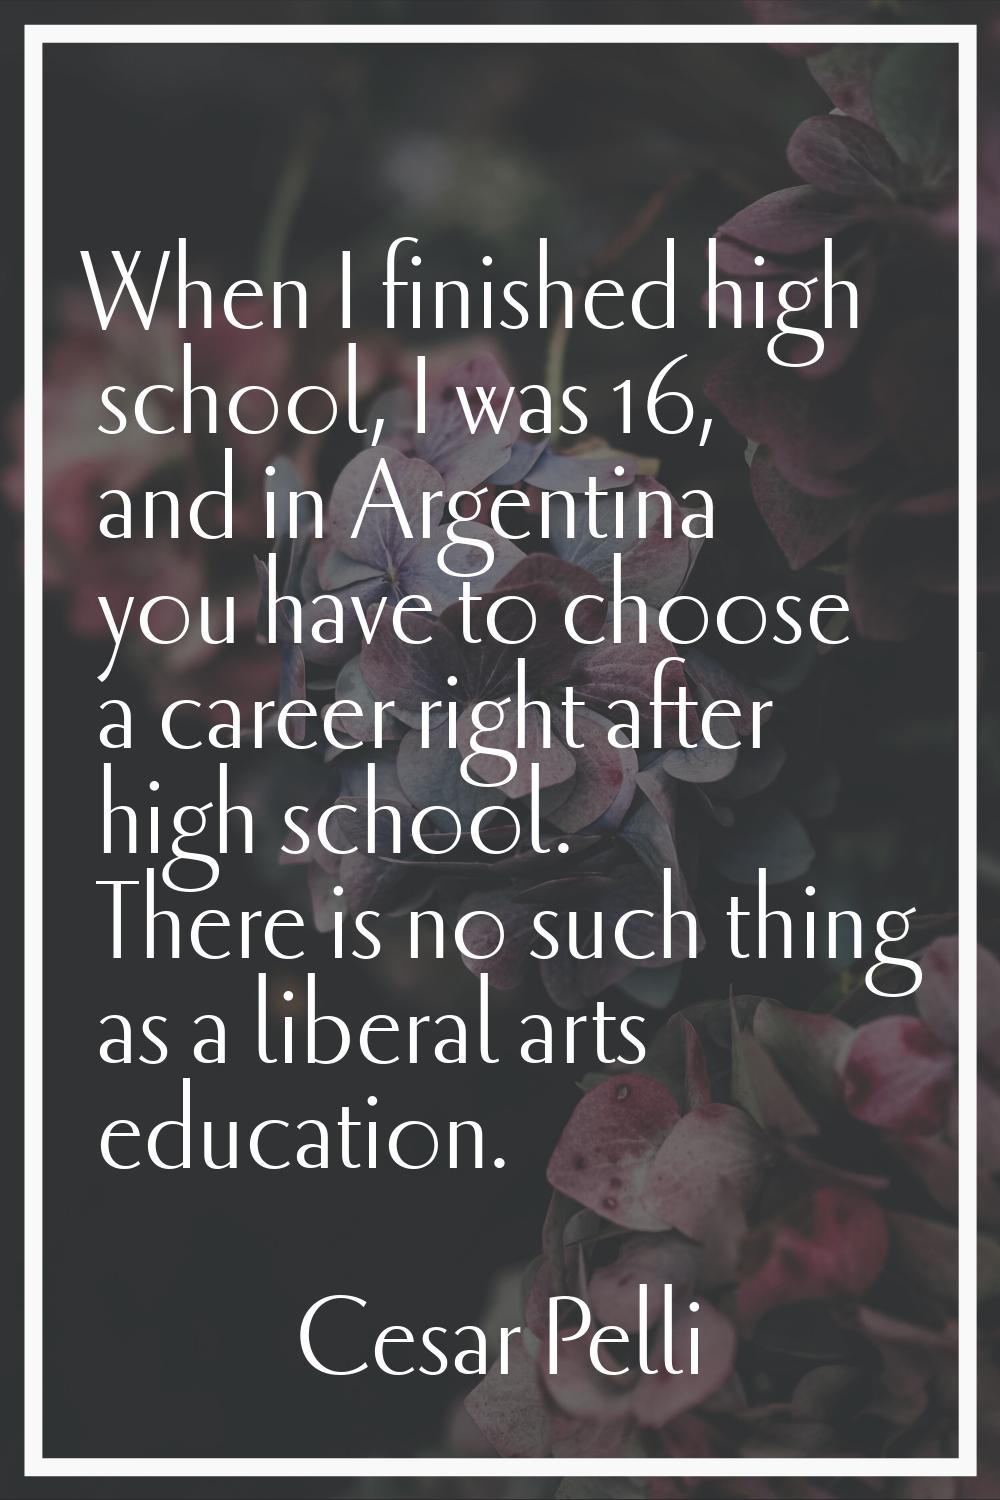 When I finished high school, I was 16, and in Argentina you have to choose a career right after hig